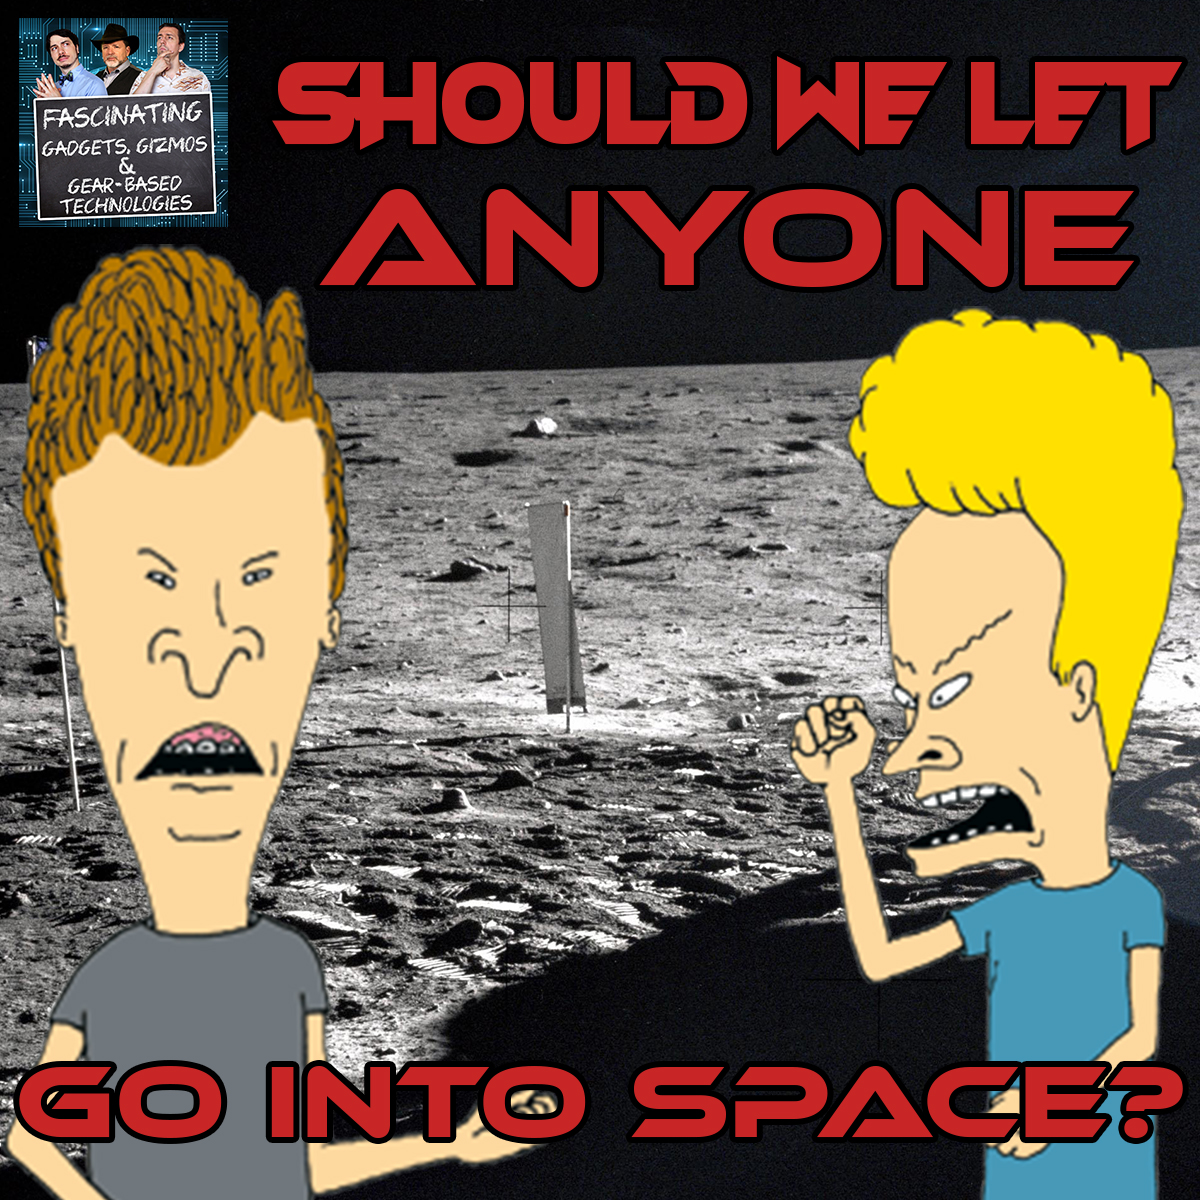 You are currently viewing Ep. 136: Should We Let ANYONE Go Into Space? (Video)